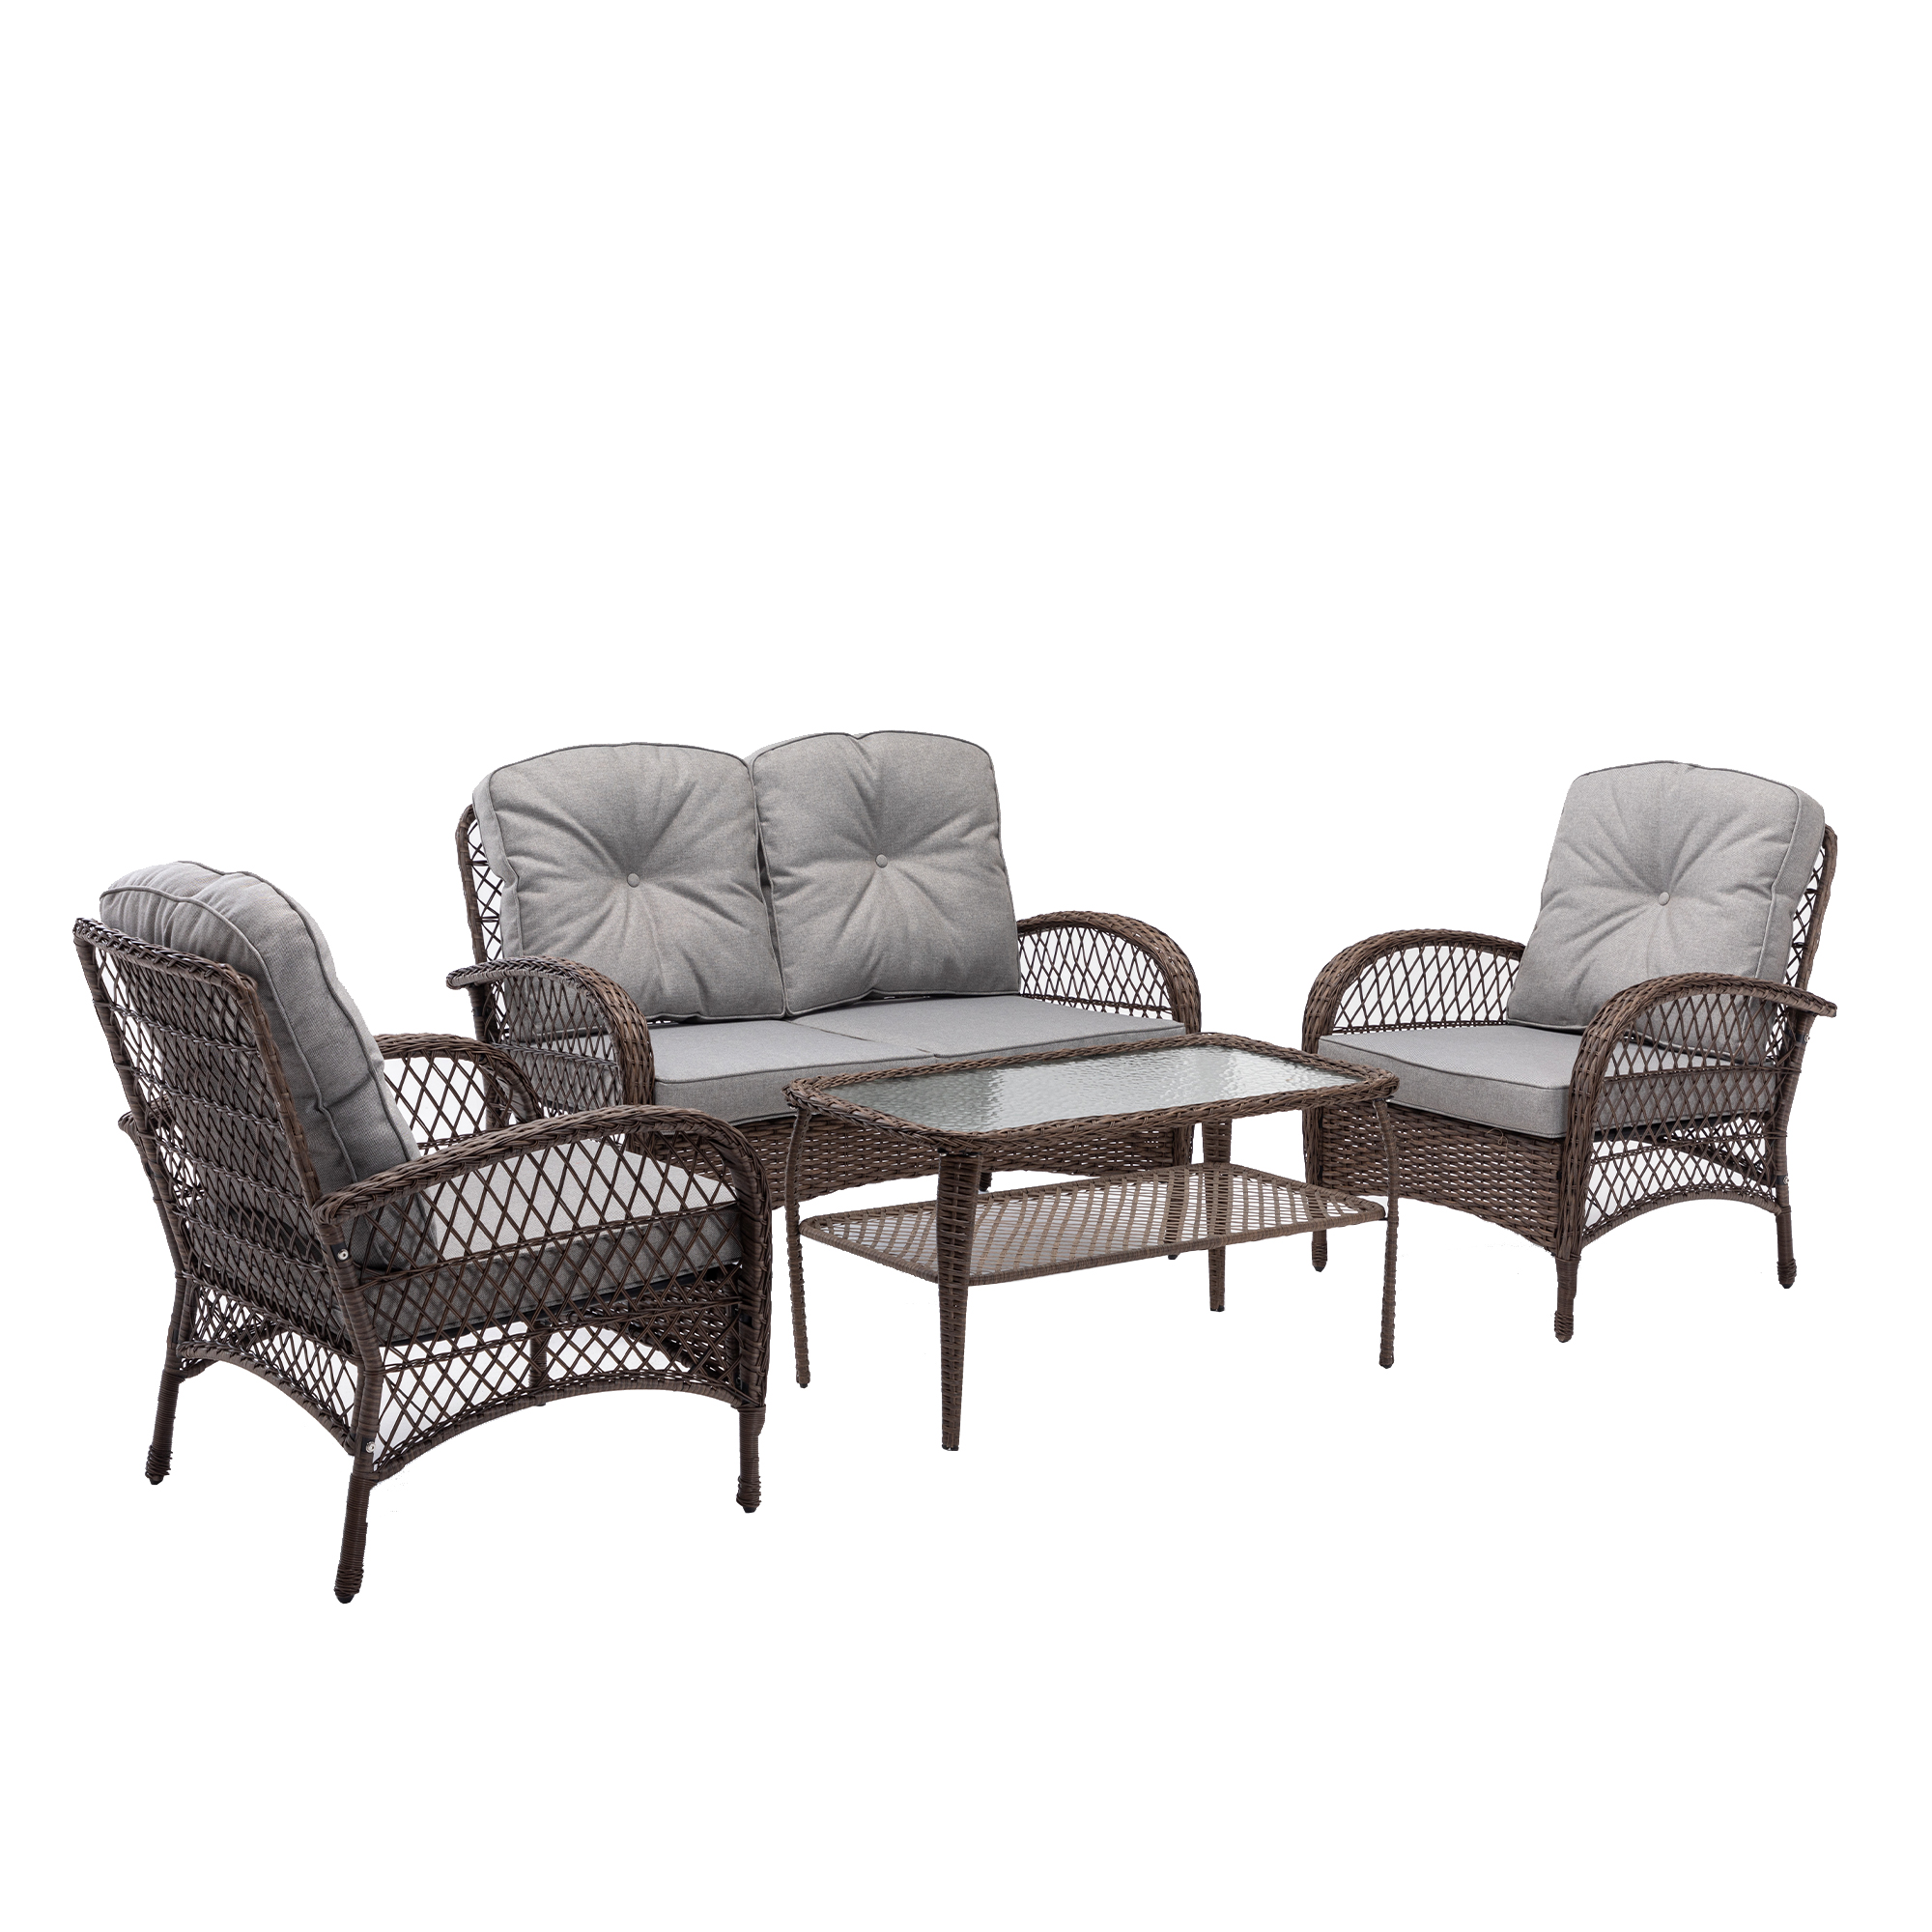 4 Pieces Outdoor Wicker Conversation Set, All-Weather Rattan Patio Furniture Sets with Arm Chairs, Tempered Glass Table, Cushions, Sectional Sofa Set for Backyard, Garden, Poolside, TR07 - image 3 of 9